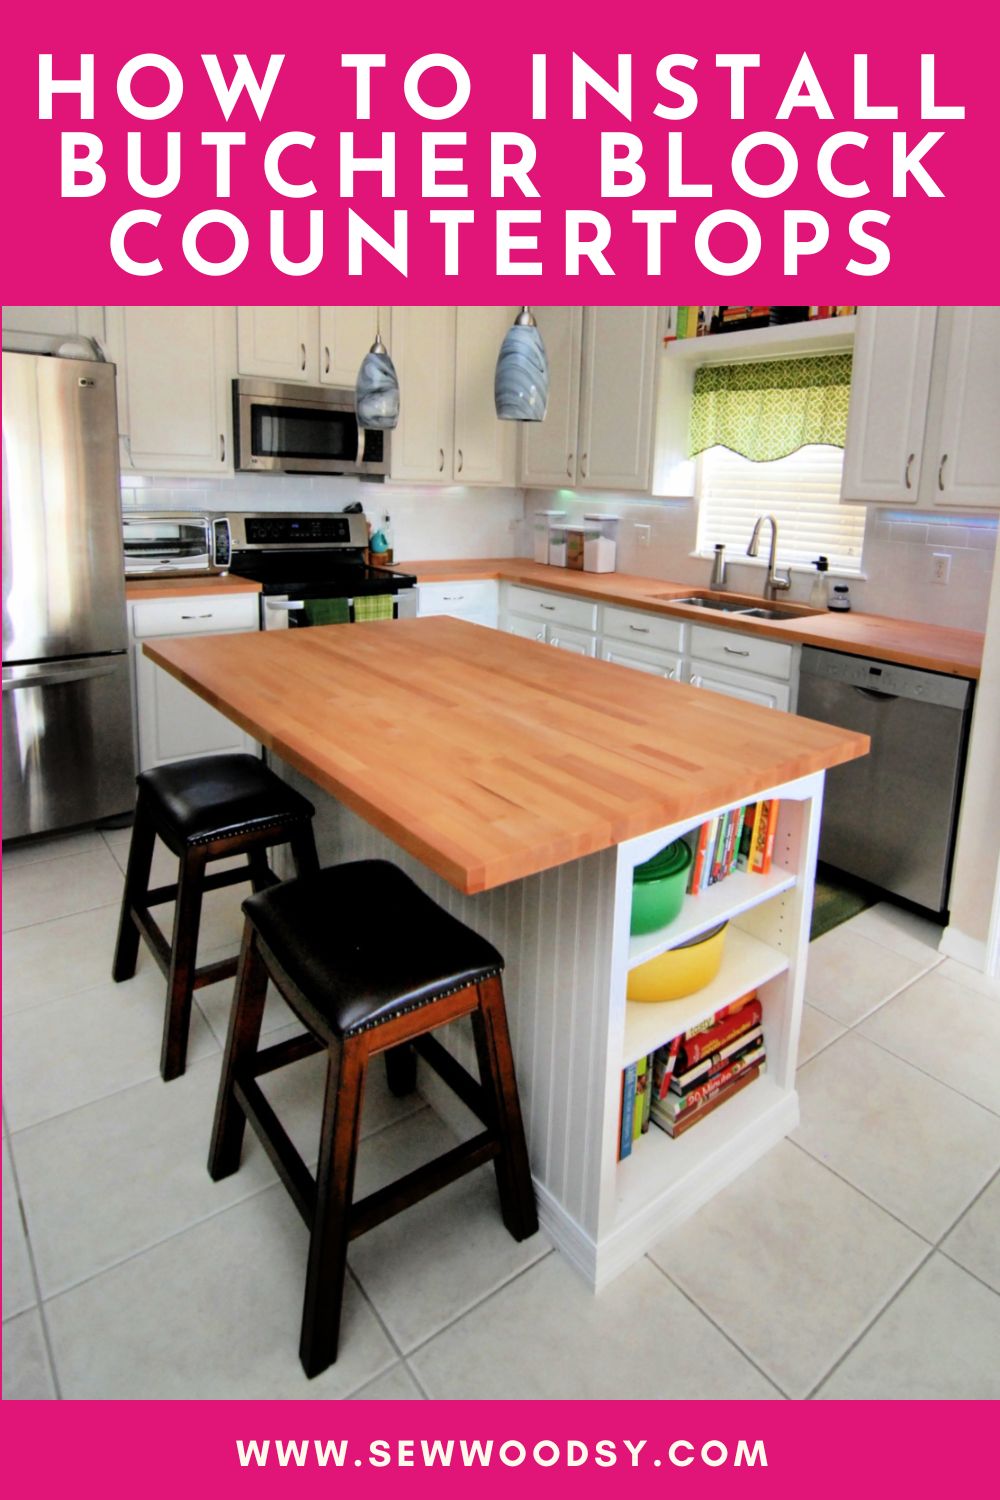 How to Install Butcher Block Countertops - Sew Woodsy